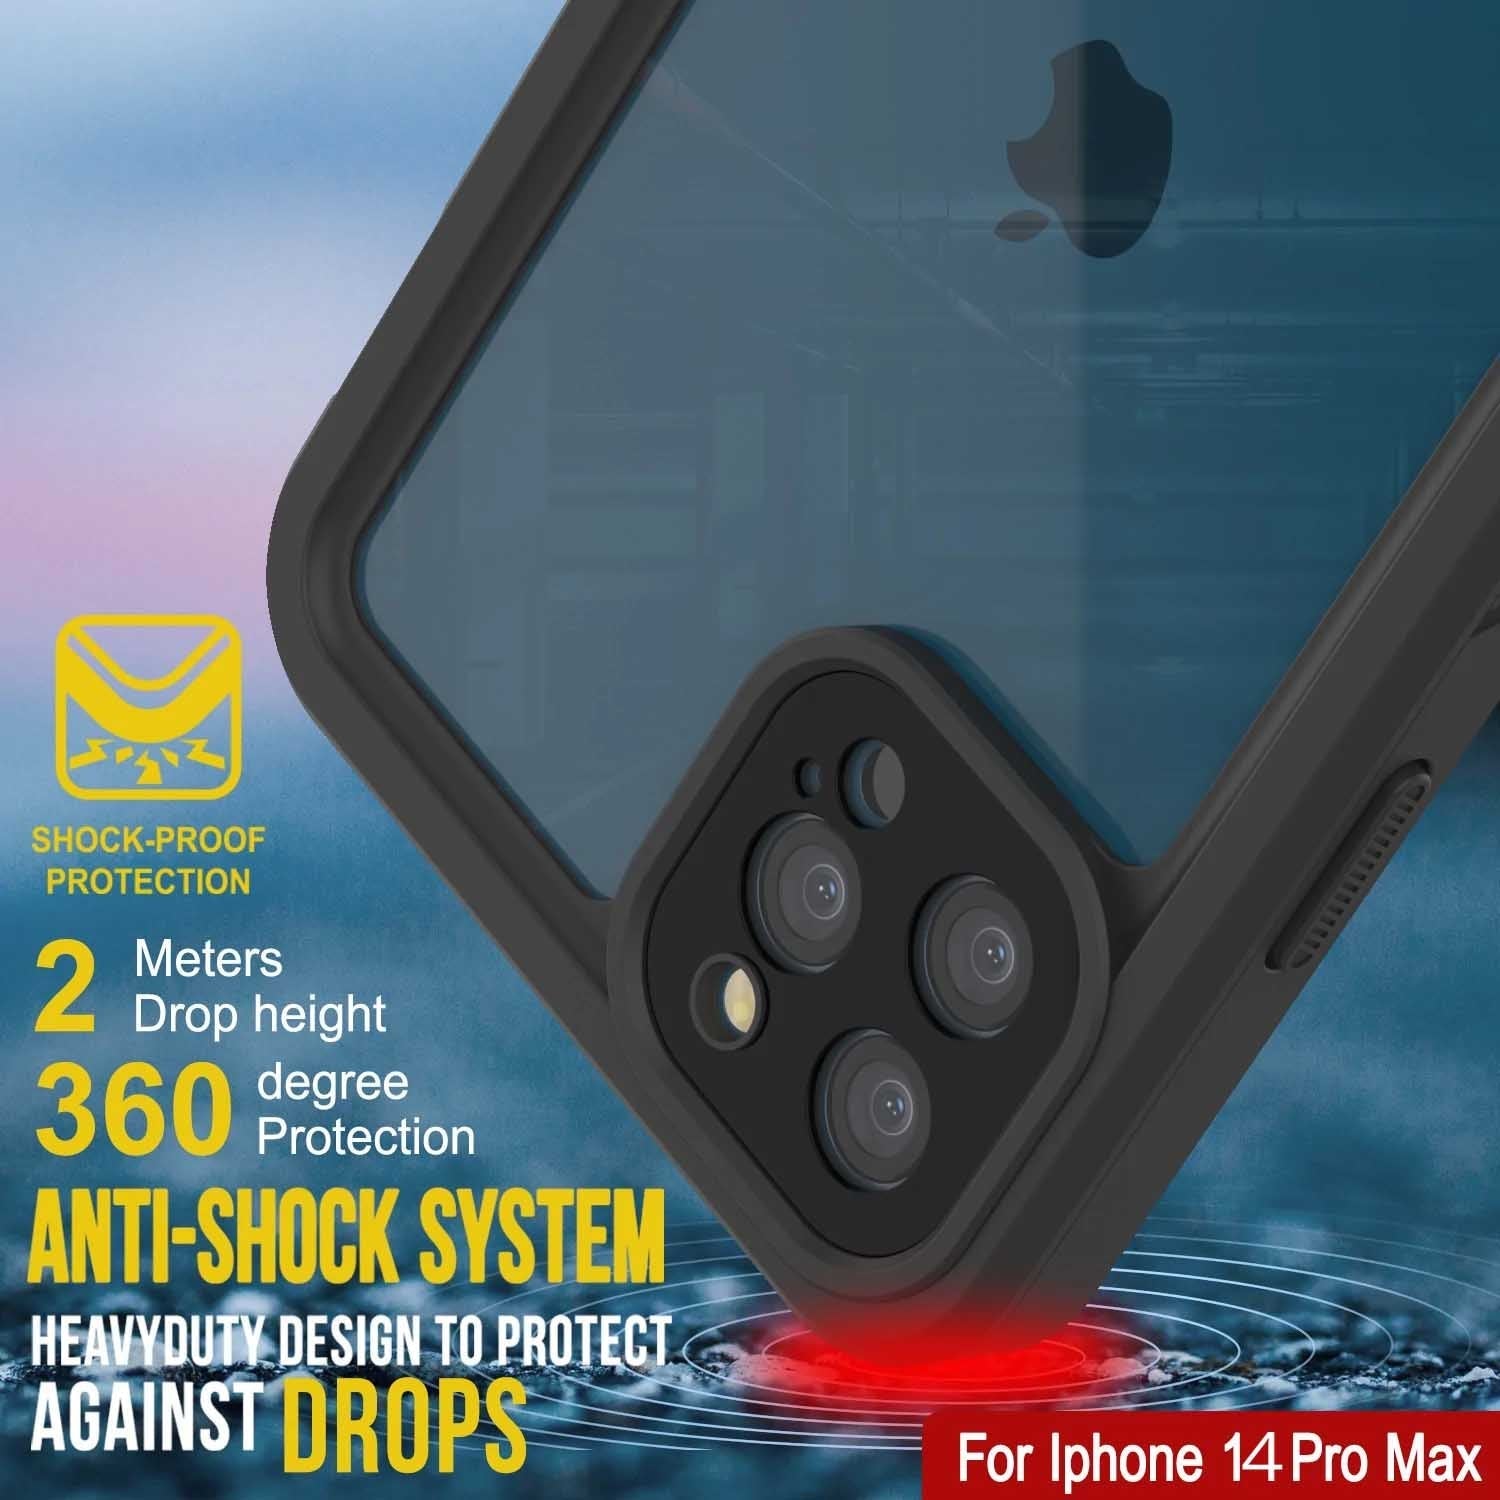 iPhone 15 Pro Waterproof Case, Punkcase [Extreme Series] Armor Cover W –  punkcase